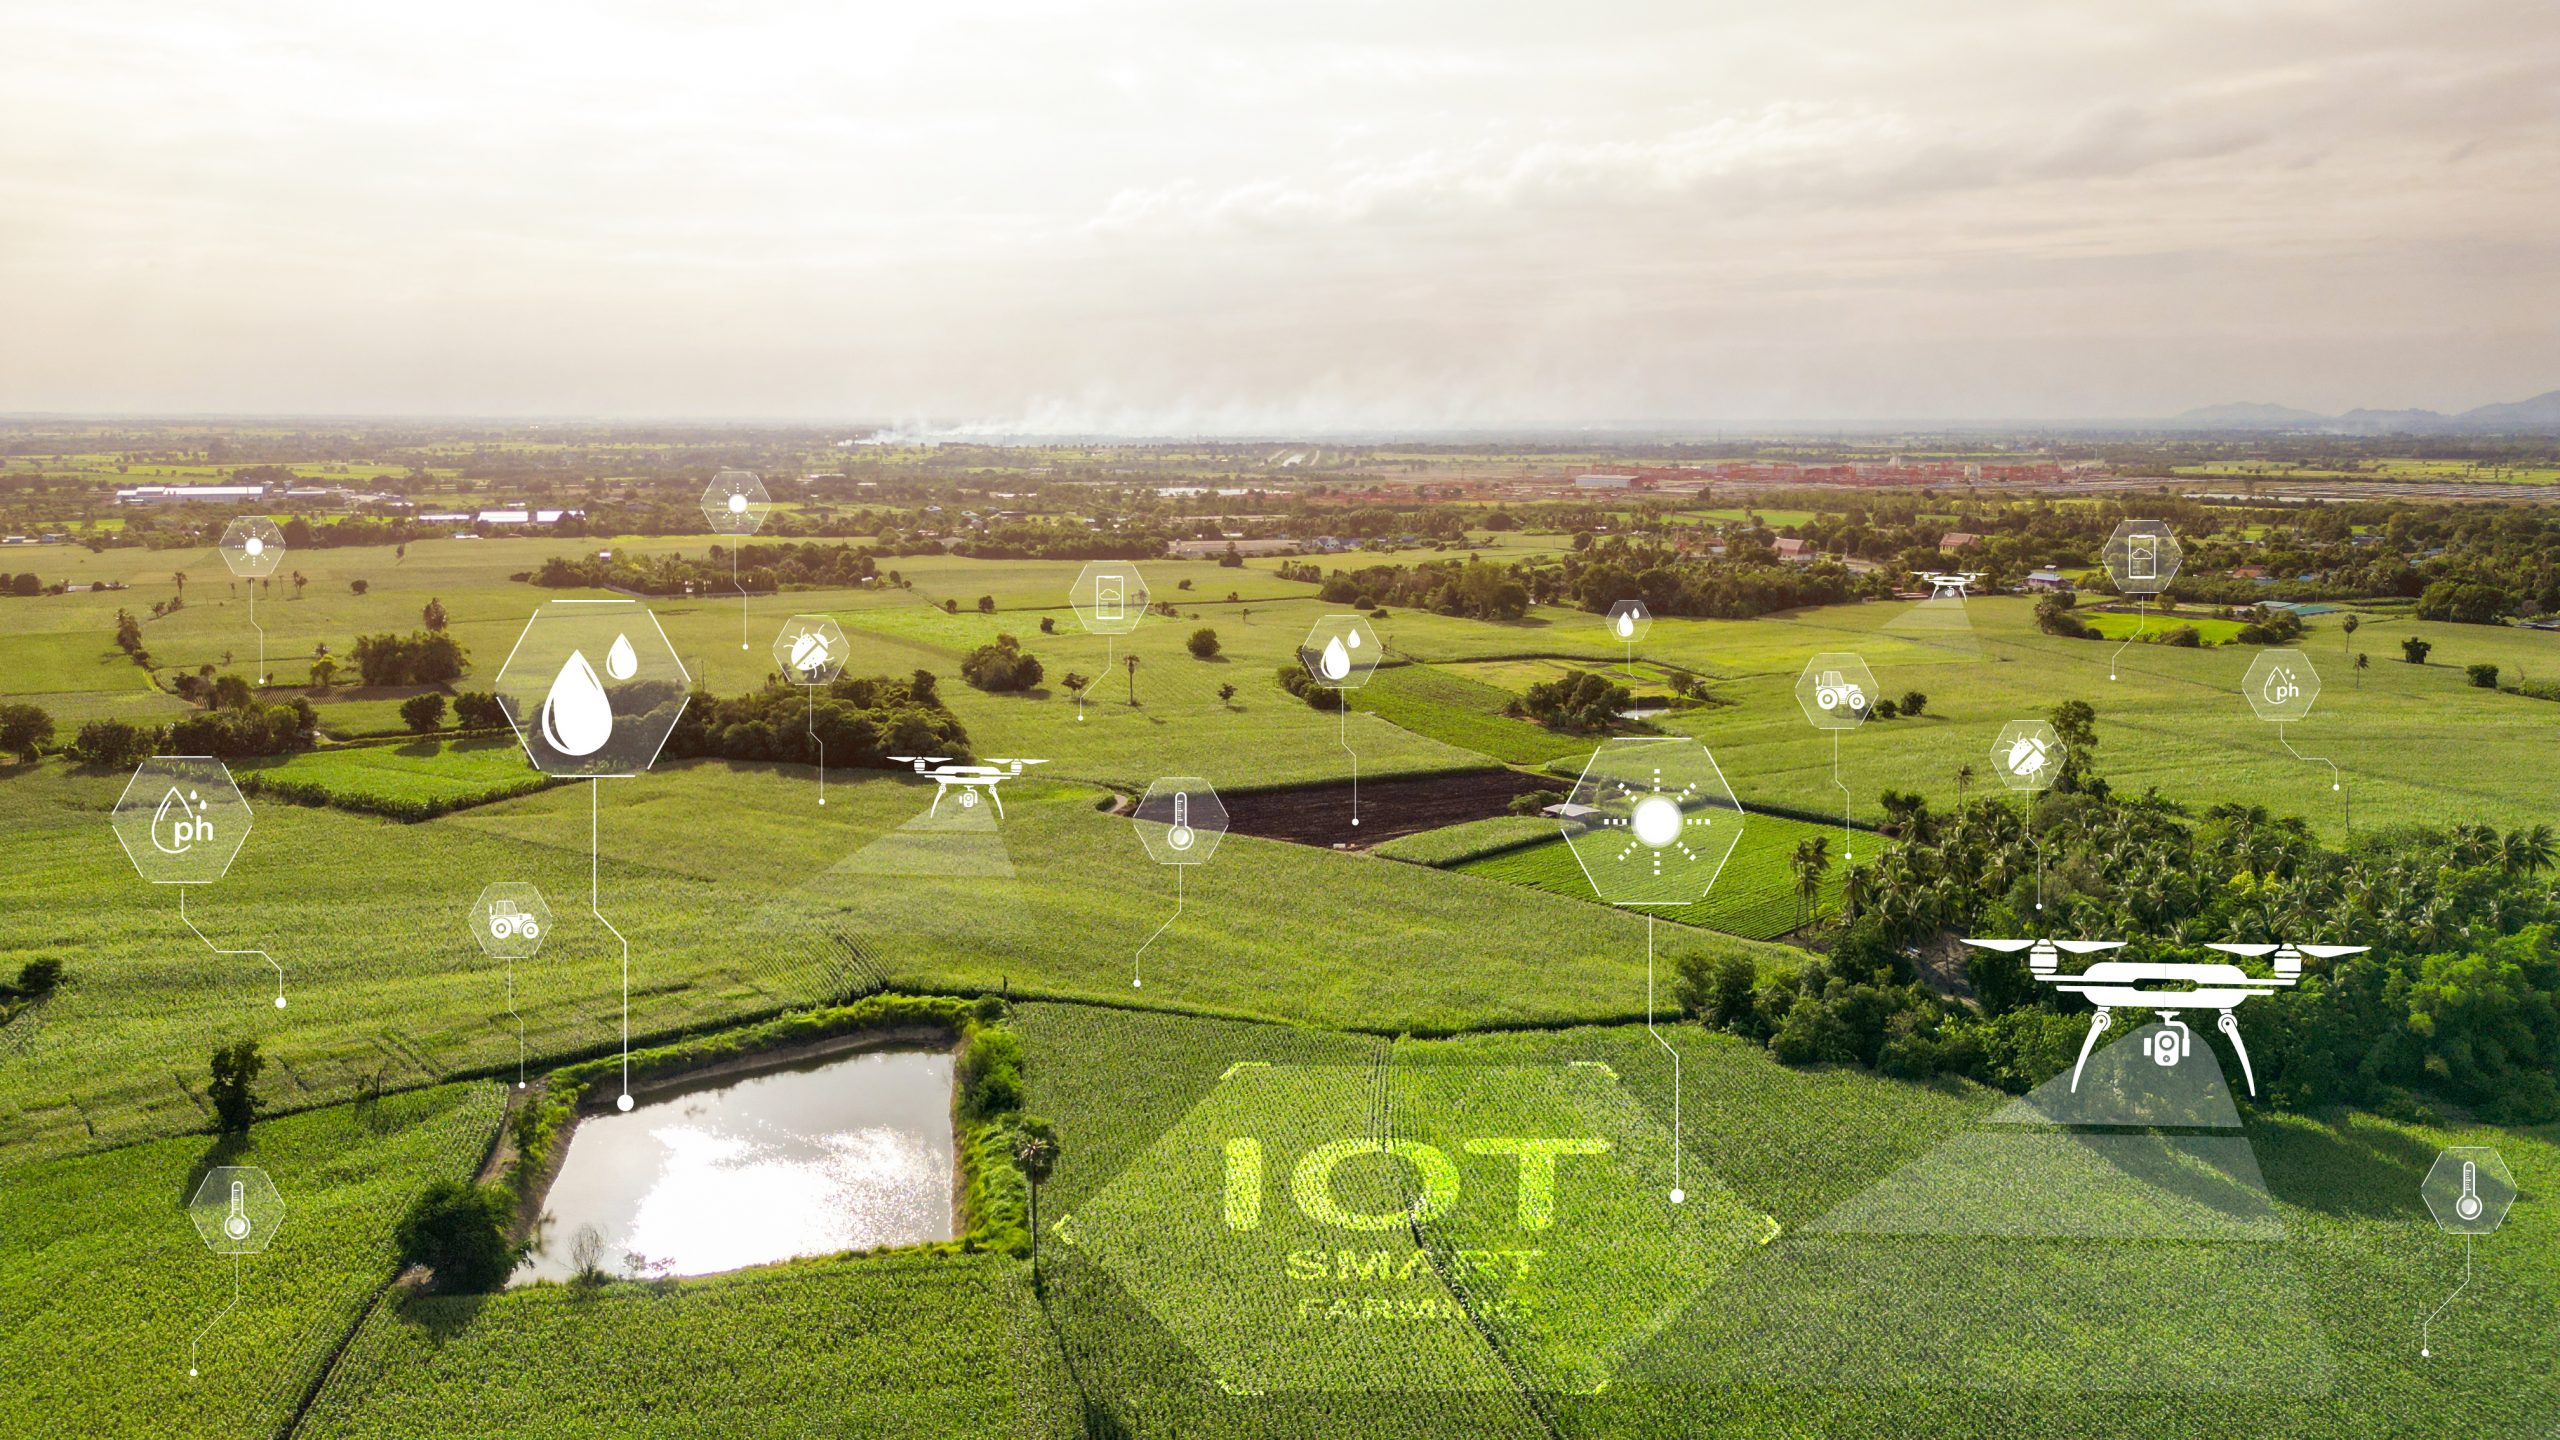 Sensors, AI, and IoT in Agriculture for Smart Animal Farming